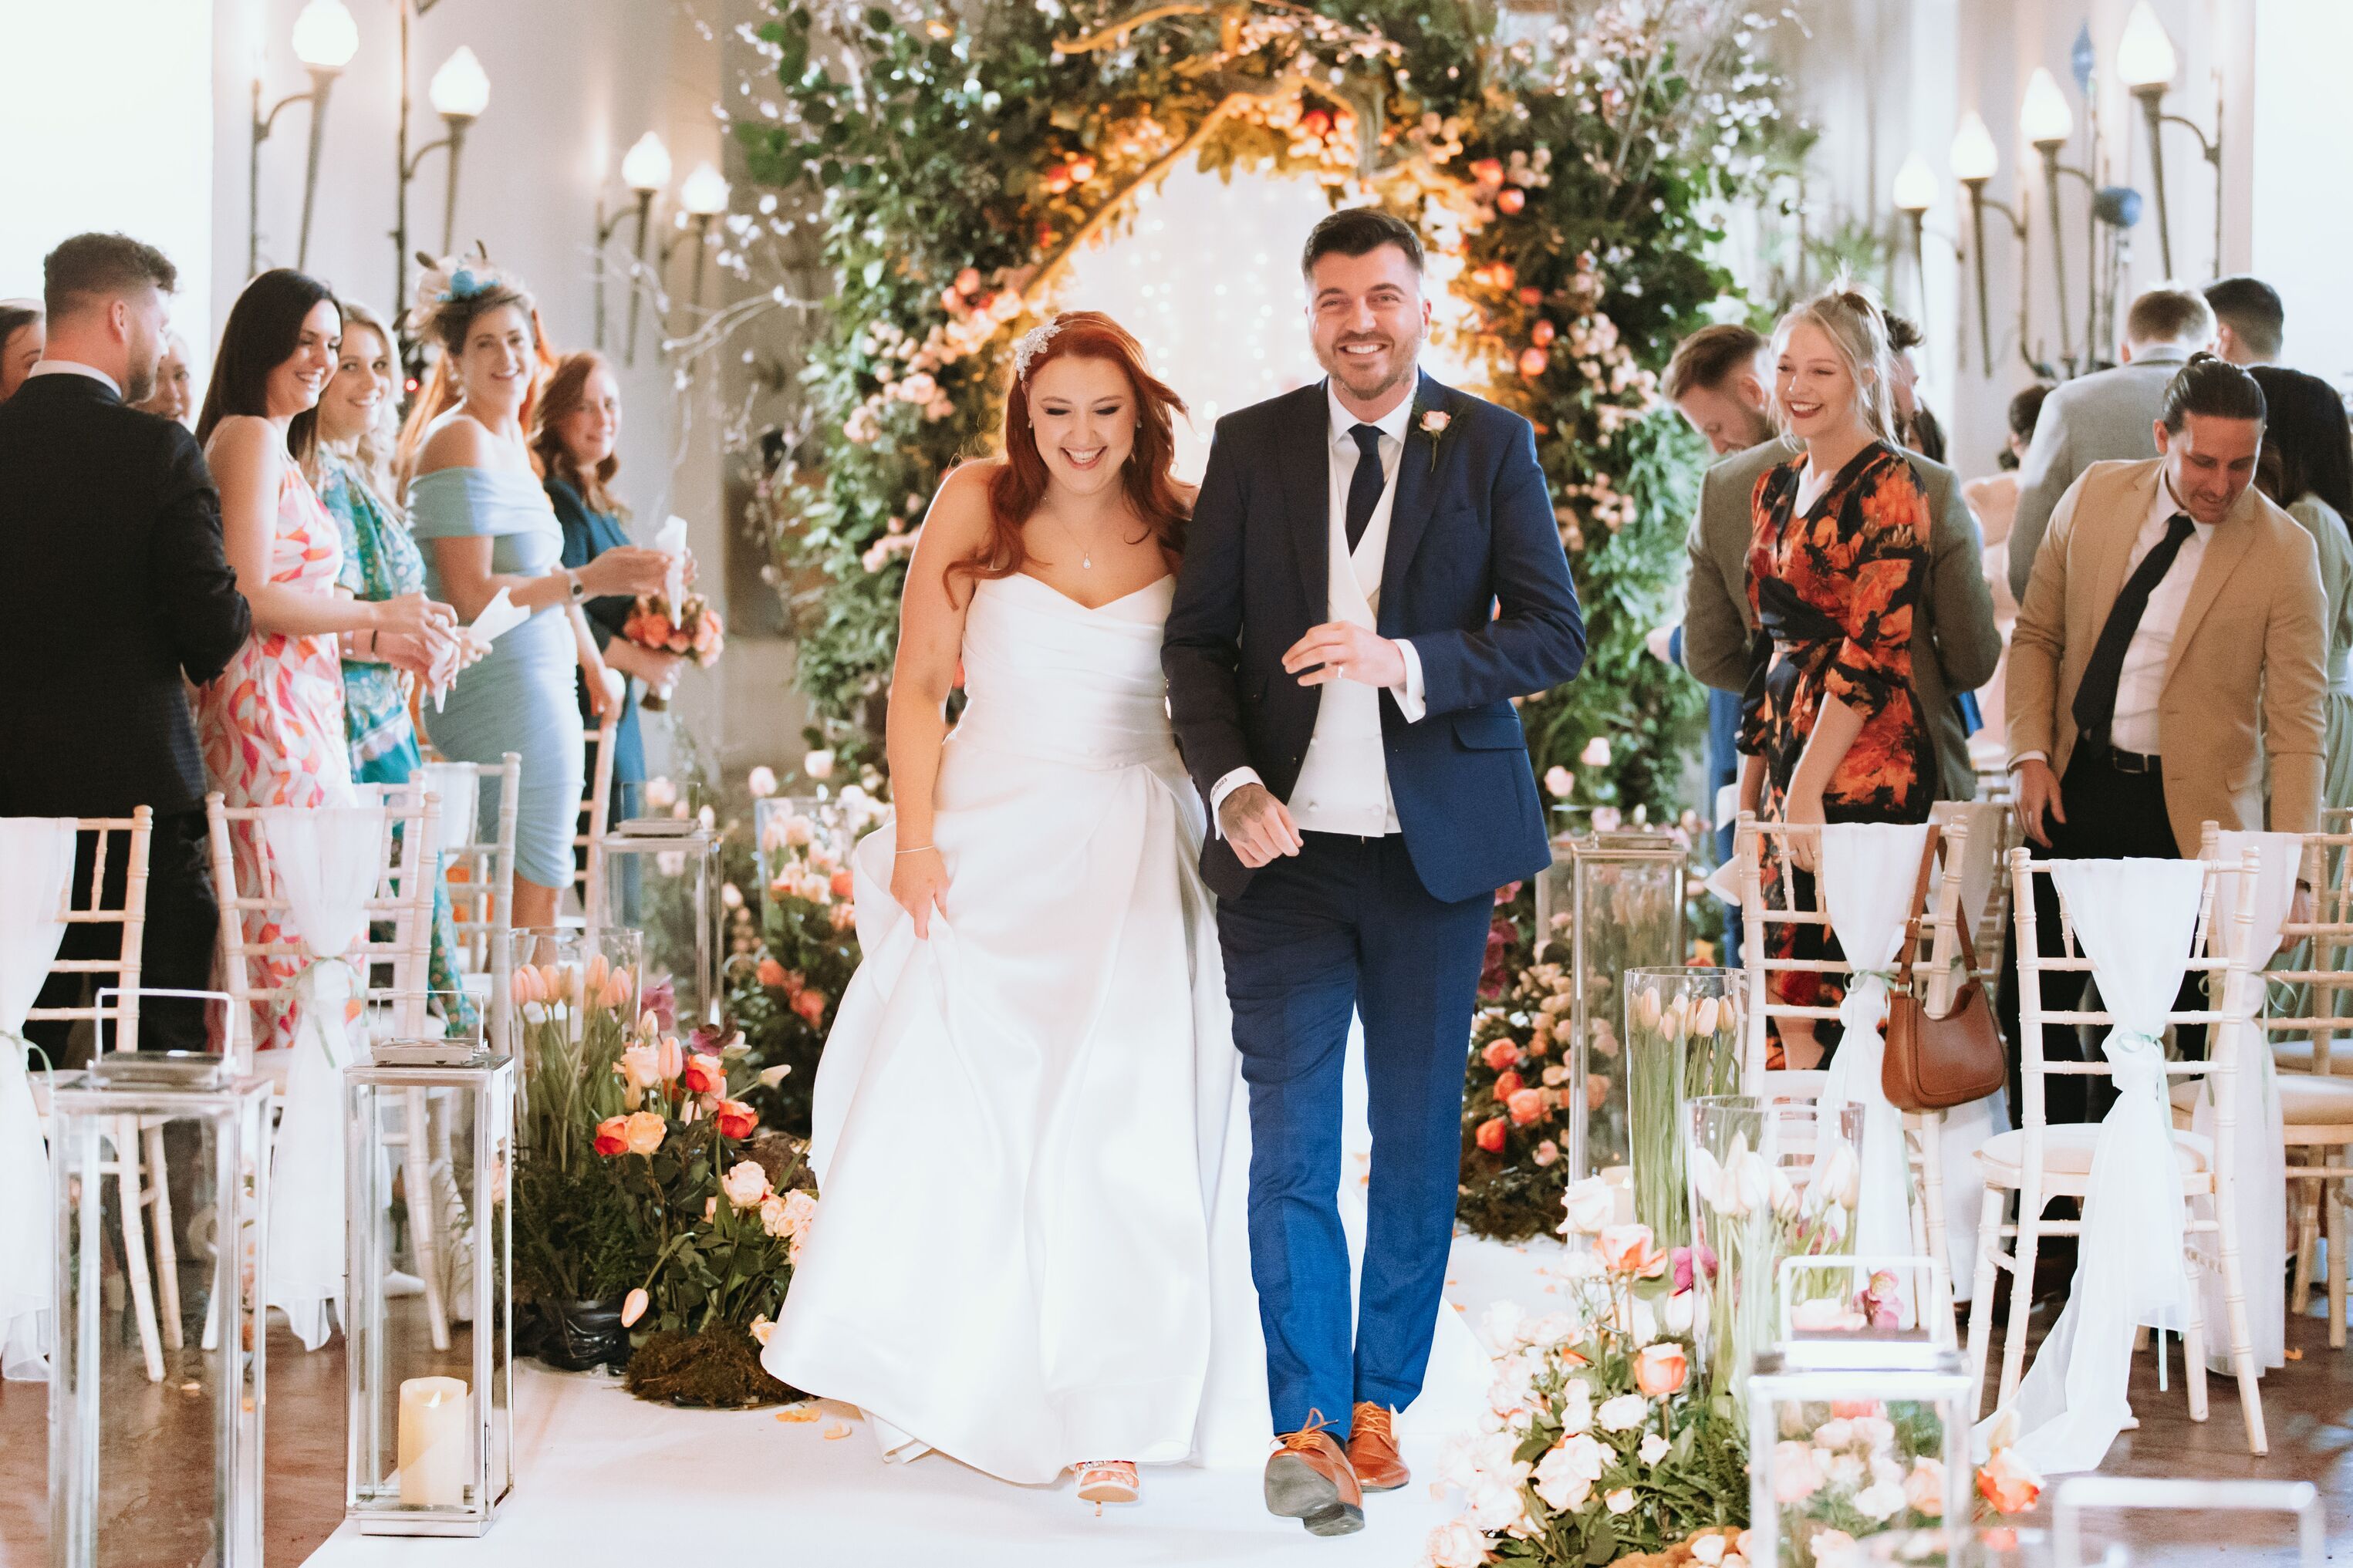 Married At First Sight UK Who pays for the weddings? pic